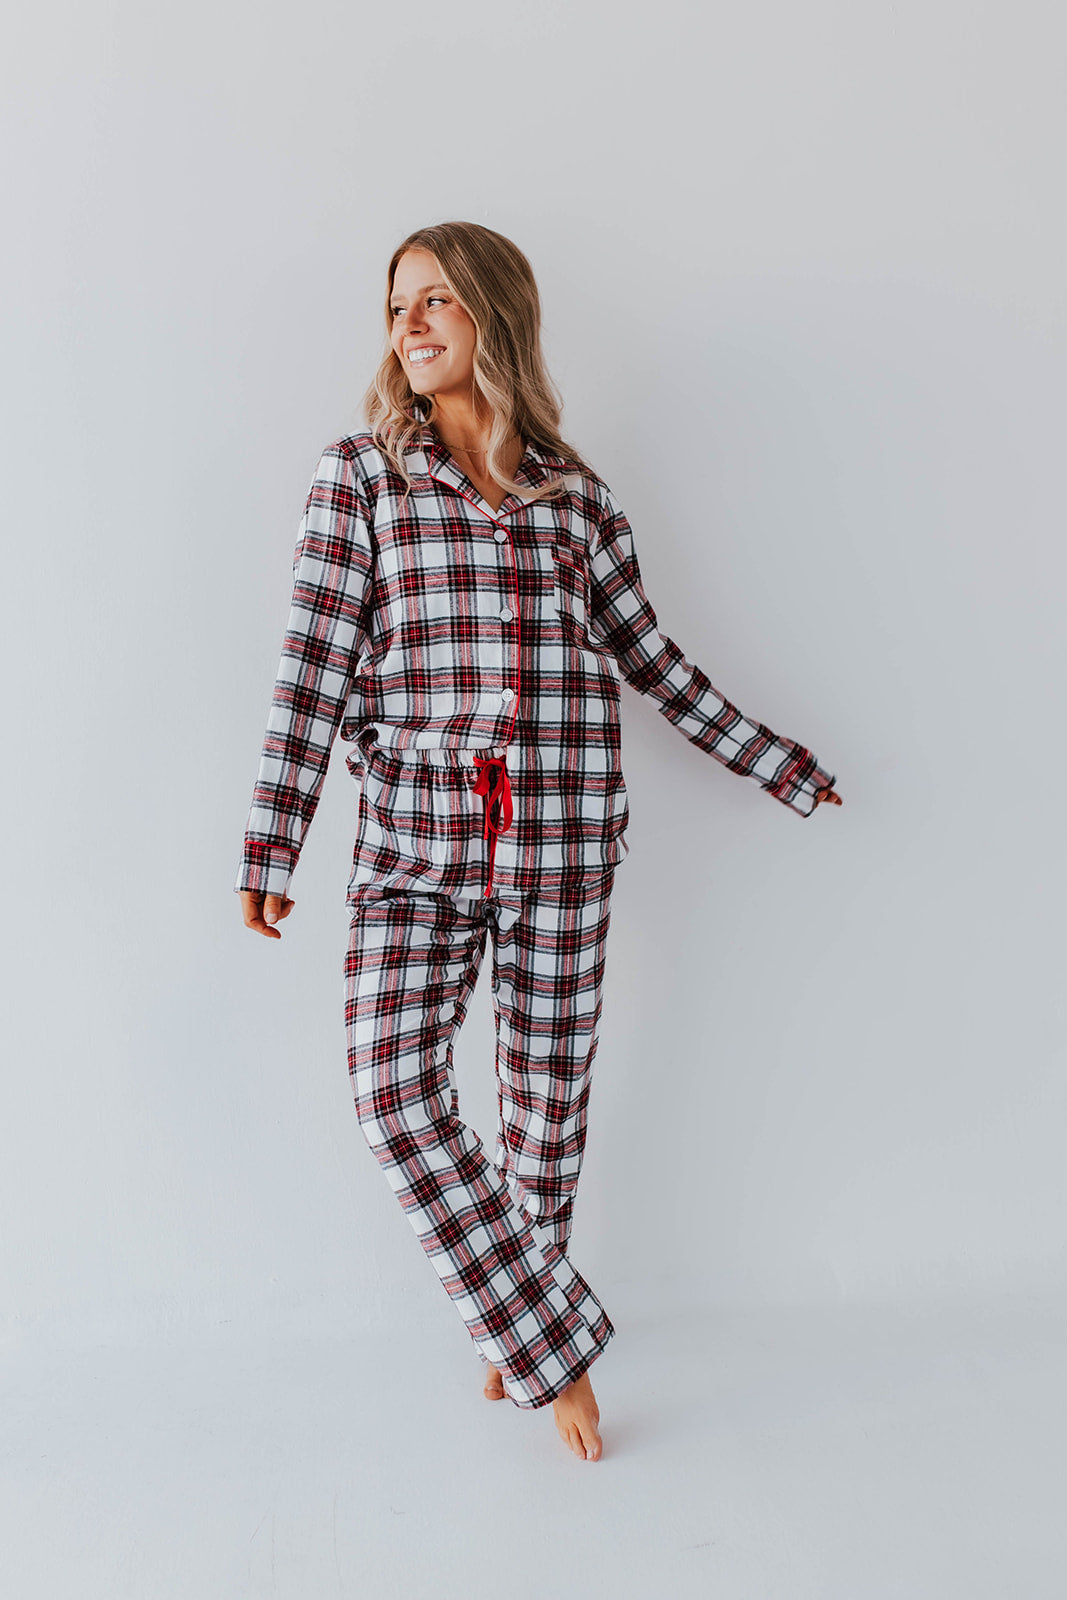 Desert FLANNEL PAJAMAS – PLAID RED IN FIRESIDE Pink THE